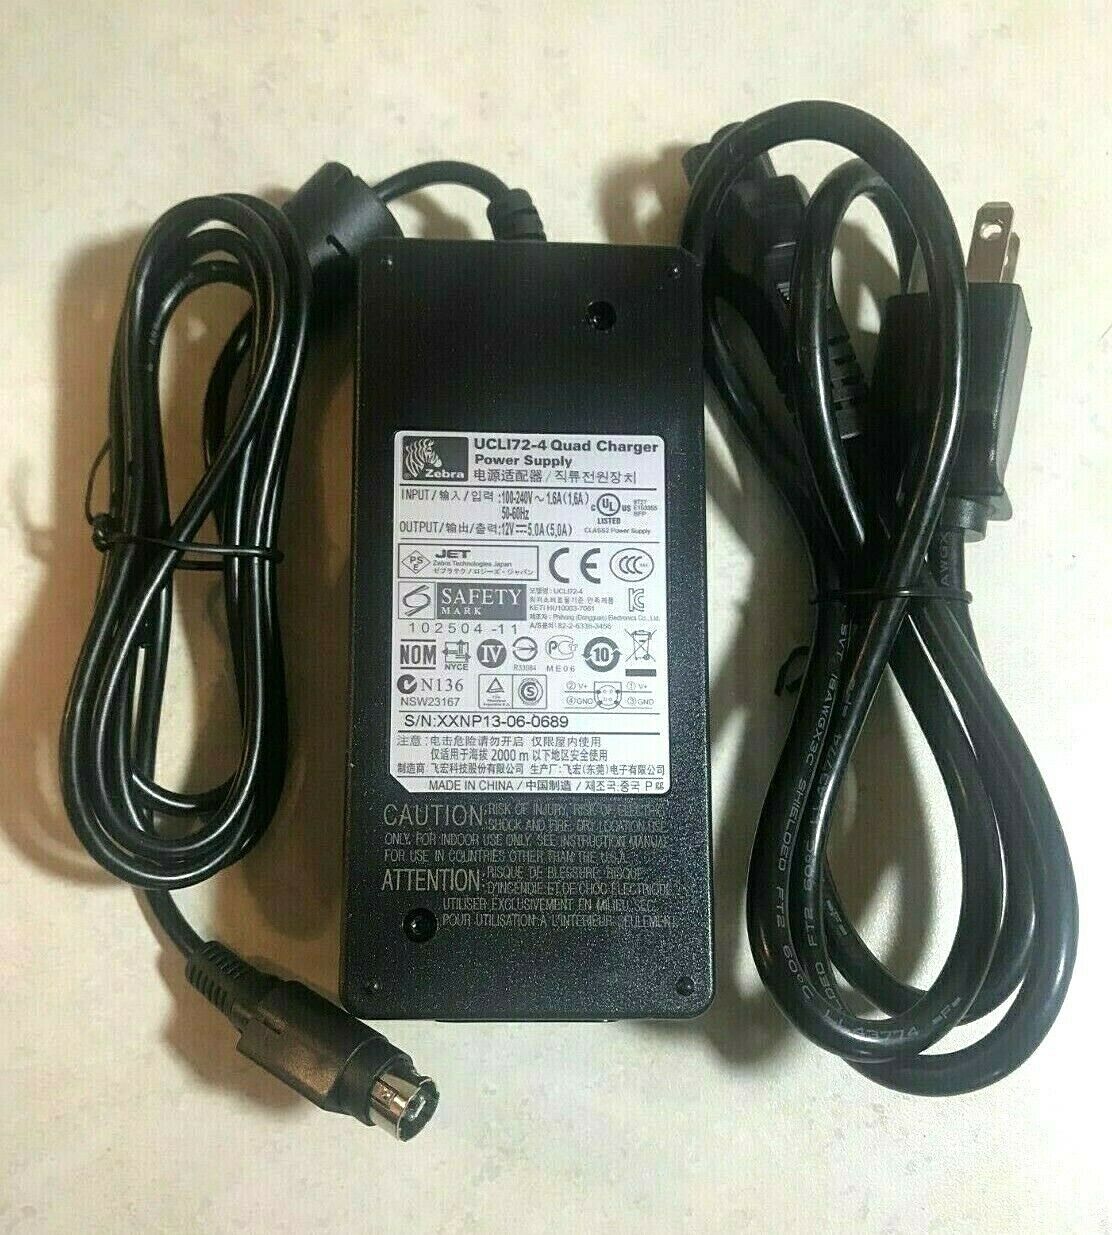 Zebra UCL172-4 Quad Charger AC DC Adapter Power Supply 60W - Genuine OEM Type: A